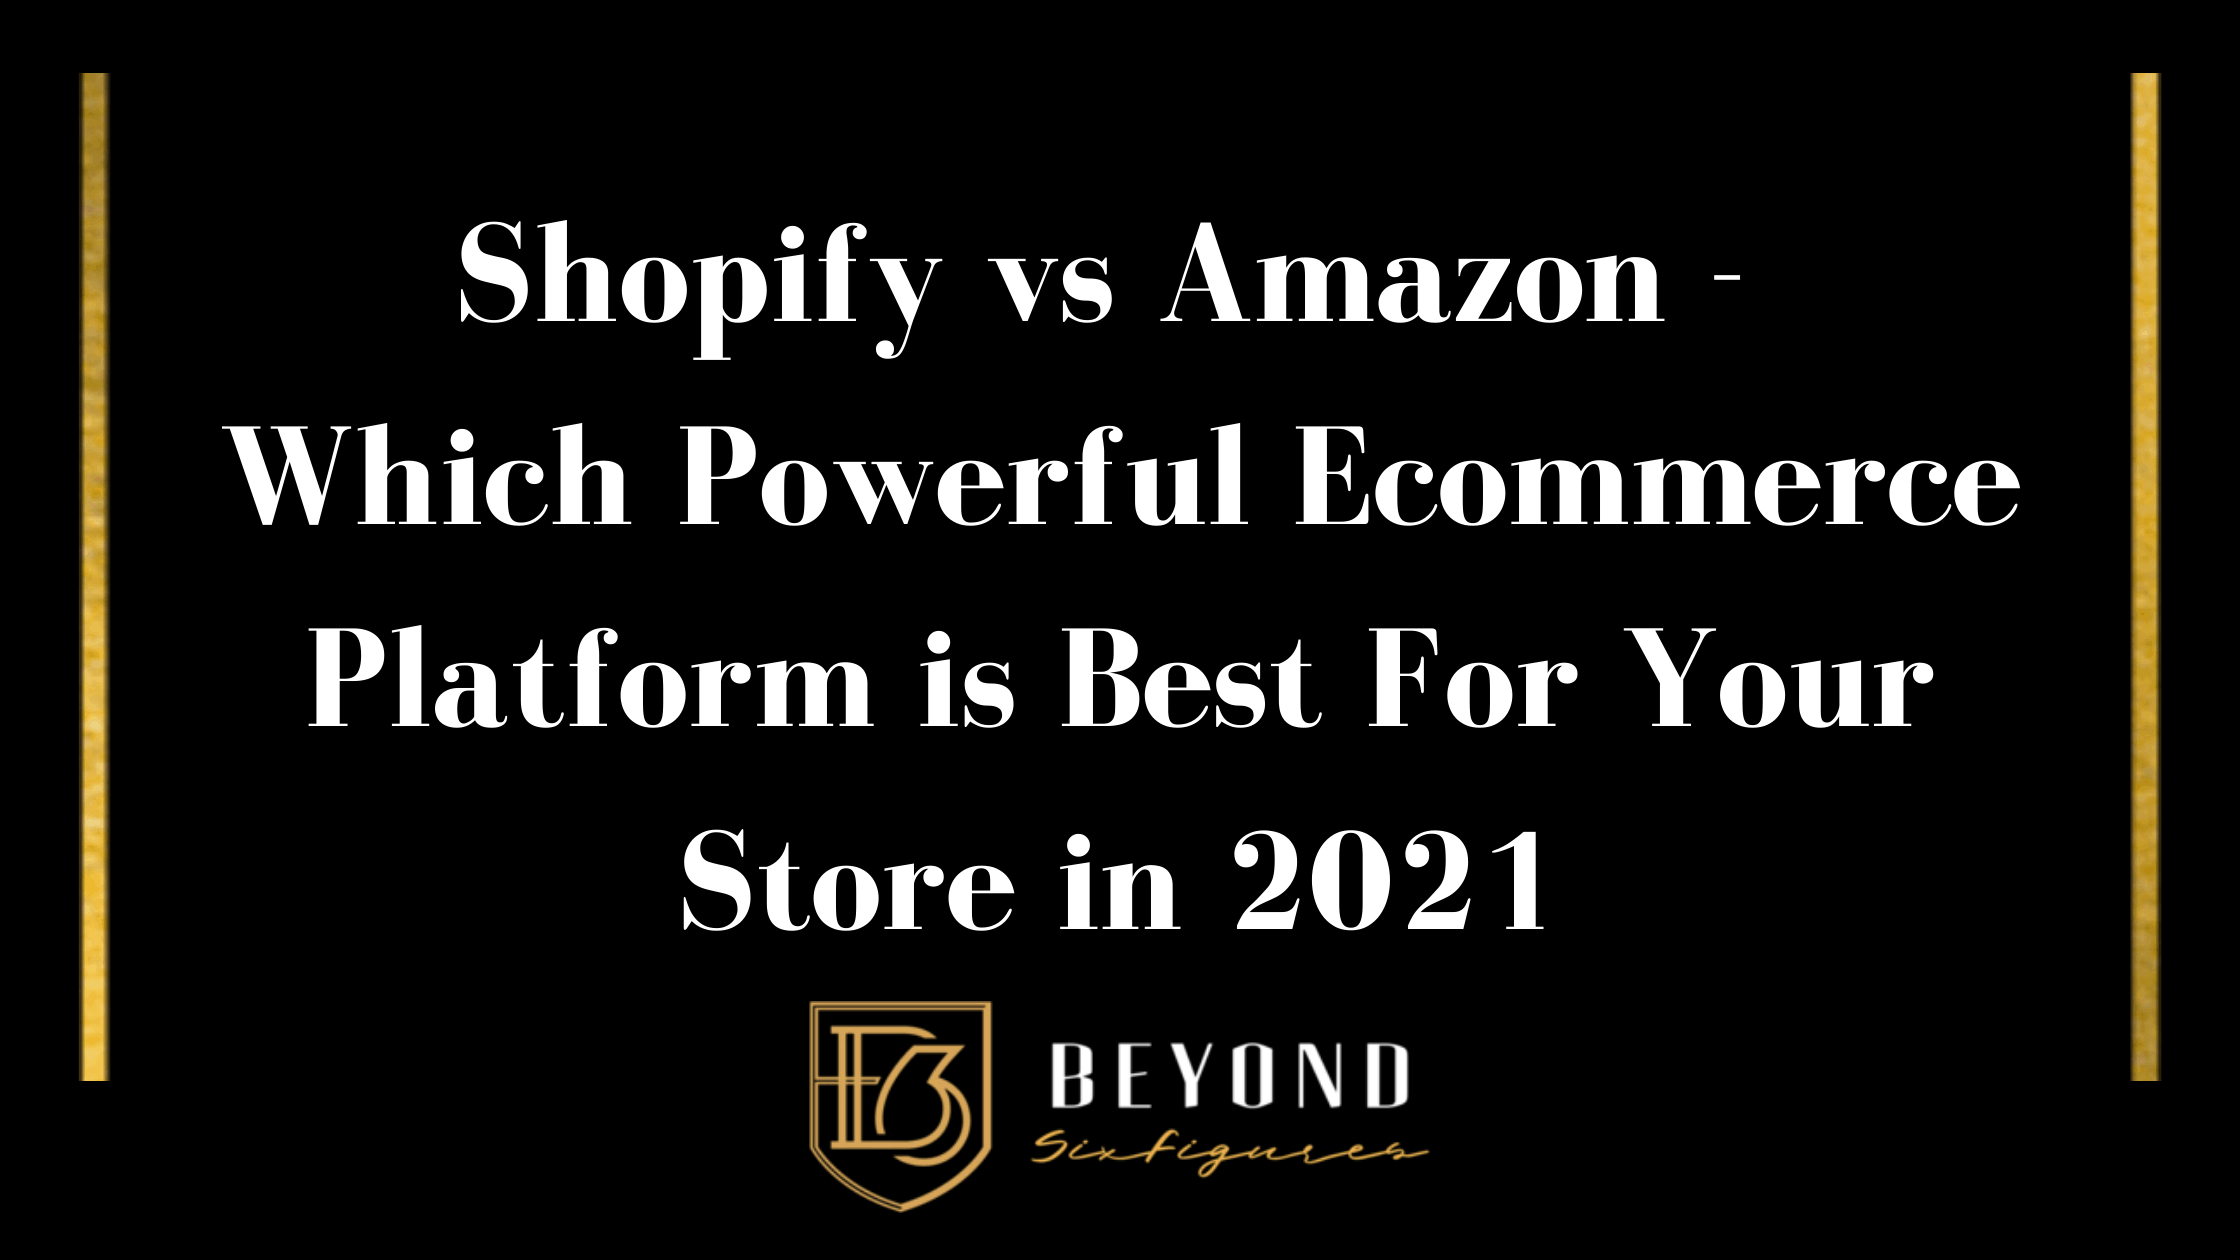 Blog Banner for Post "Shopify vs Amazon - Which Powerful Ecommerce Platform is Best For Your Store in 2021"